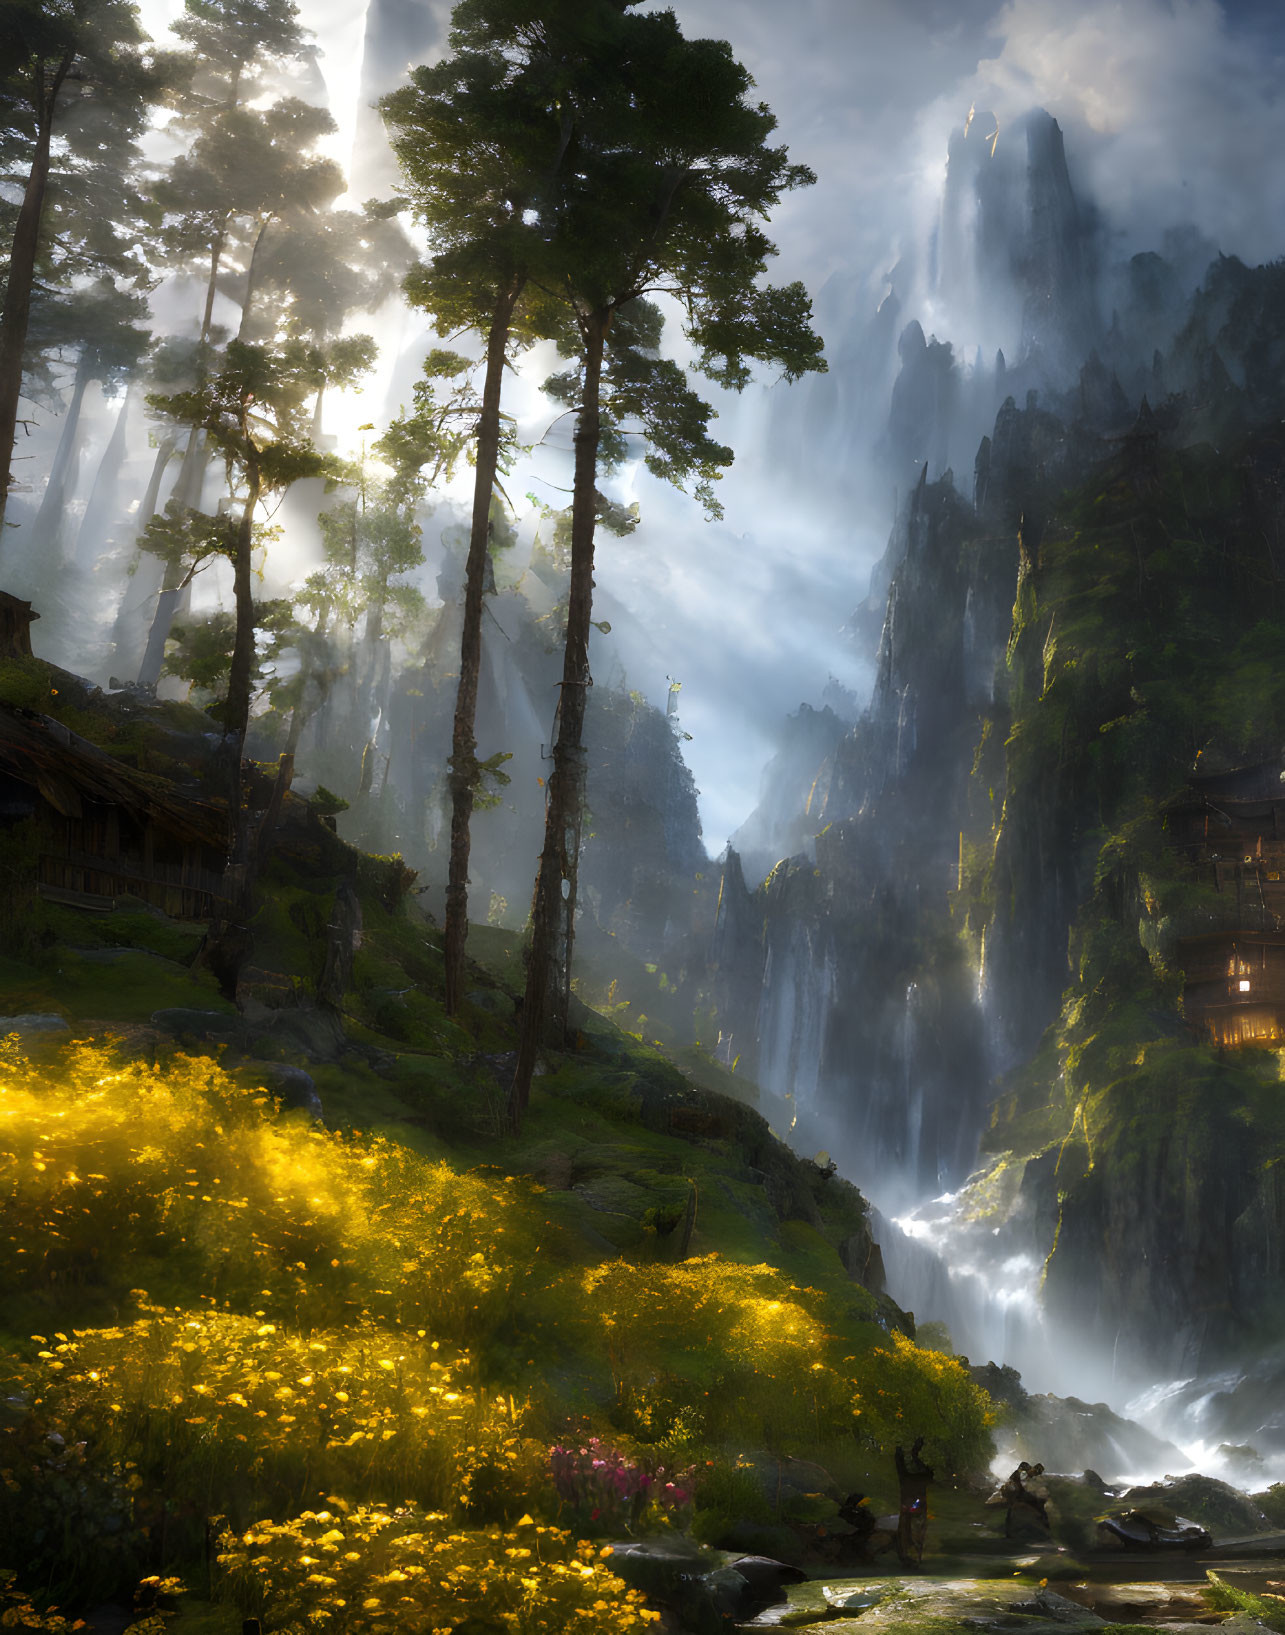 Mystical forest with cliffs, waterfalls, and wildflowers